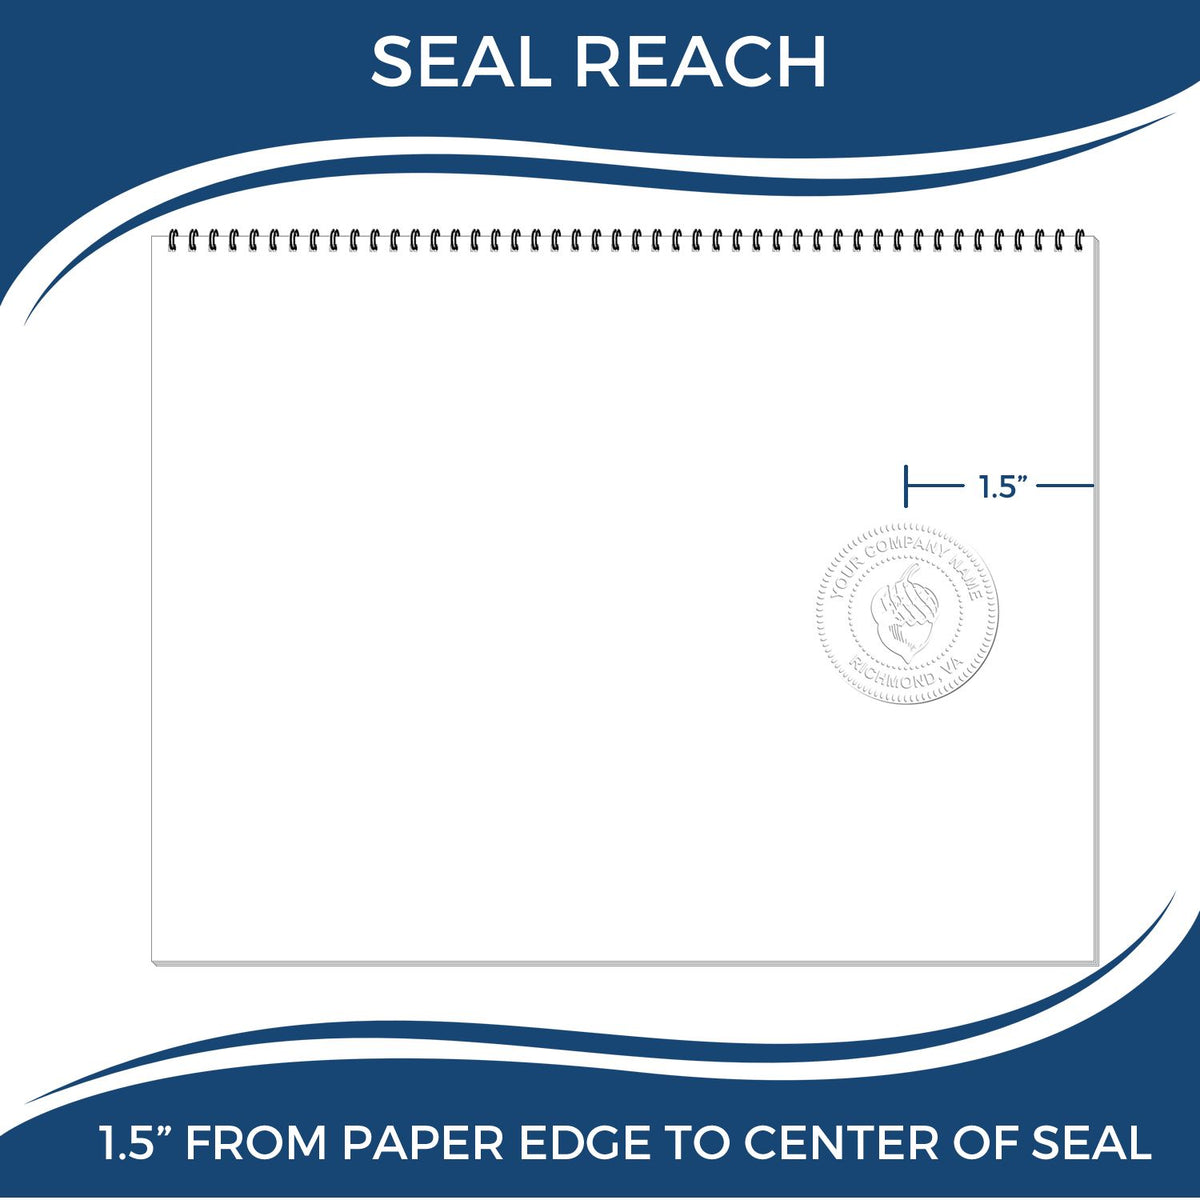 An infographic showing the seal reach which is represented by a ruler and a miniature seal image of the State of Oklahoma Soft Land Surveyor Embossing Seal